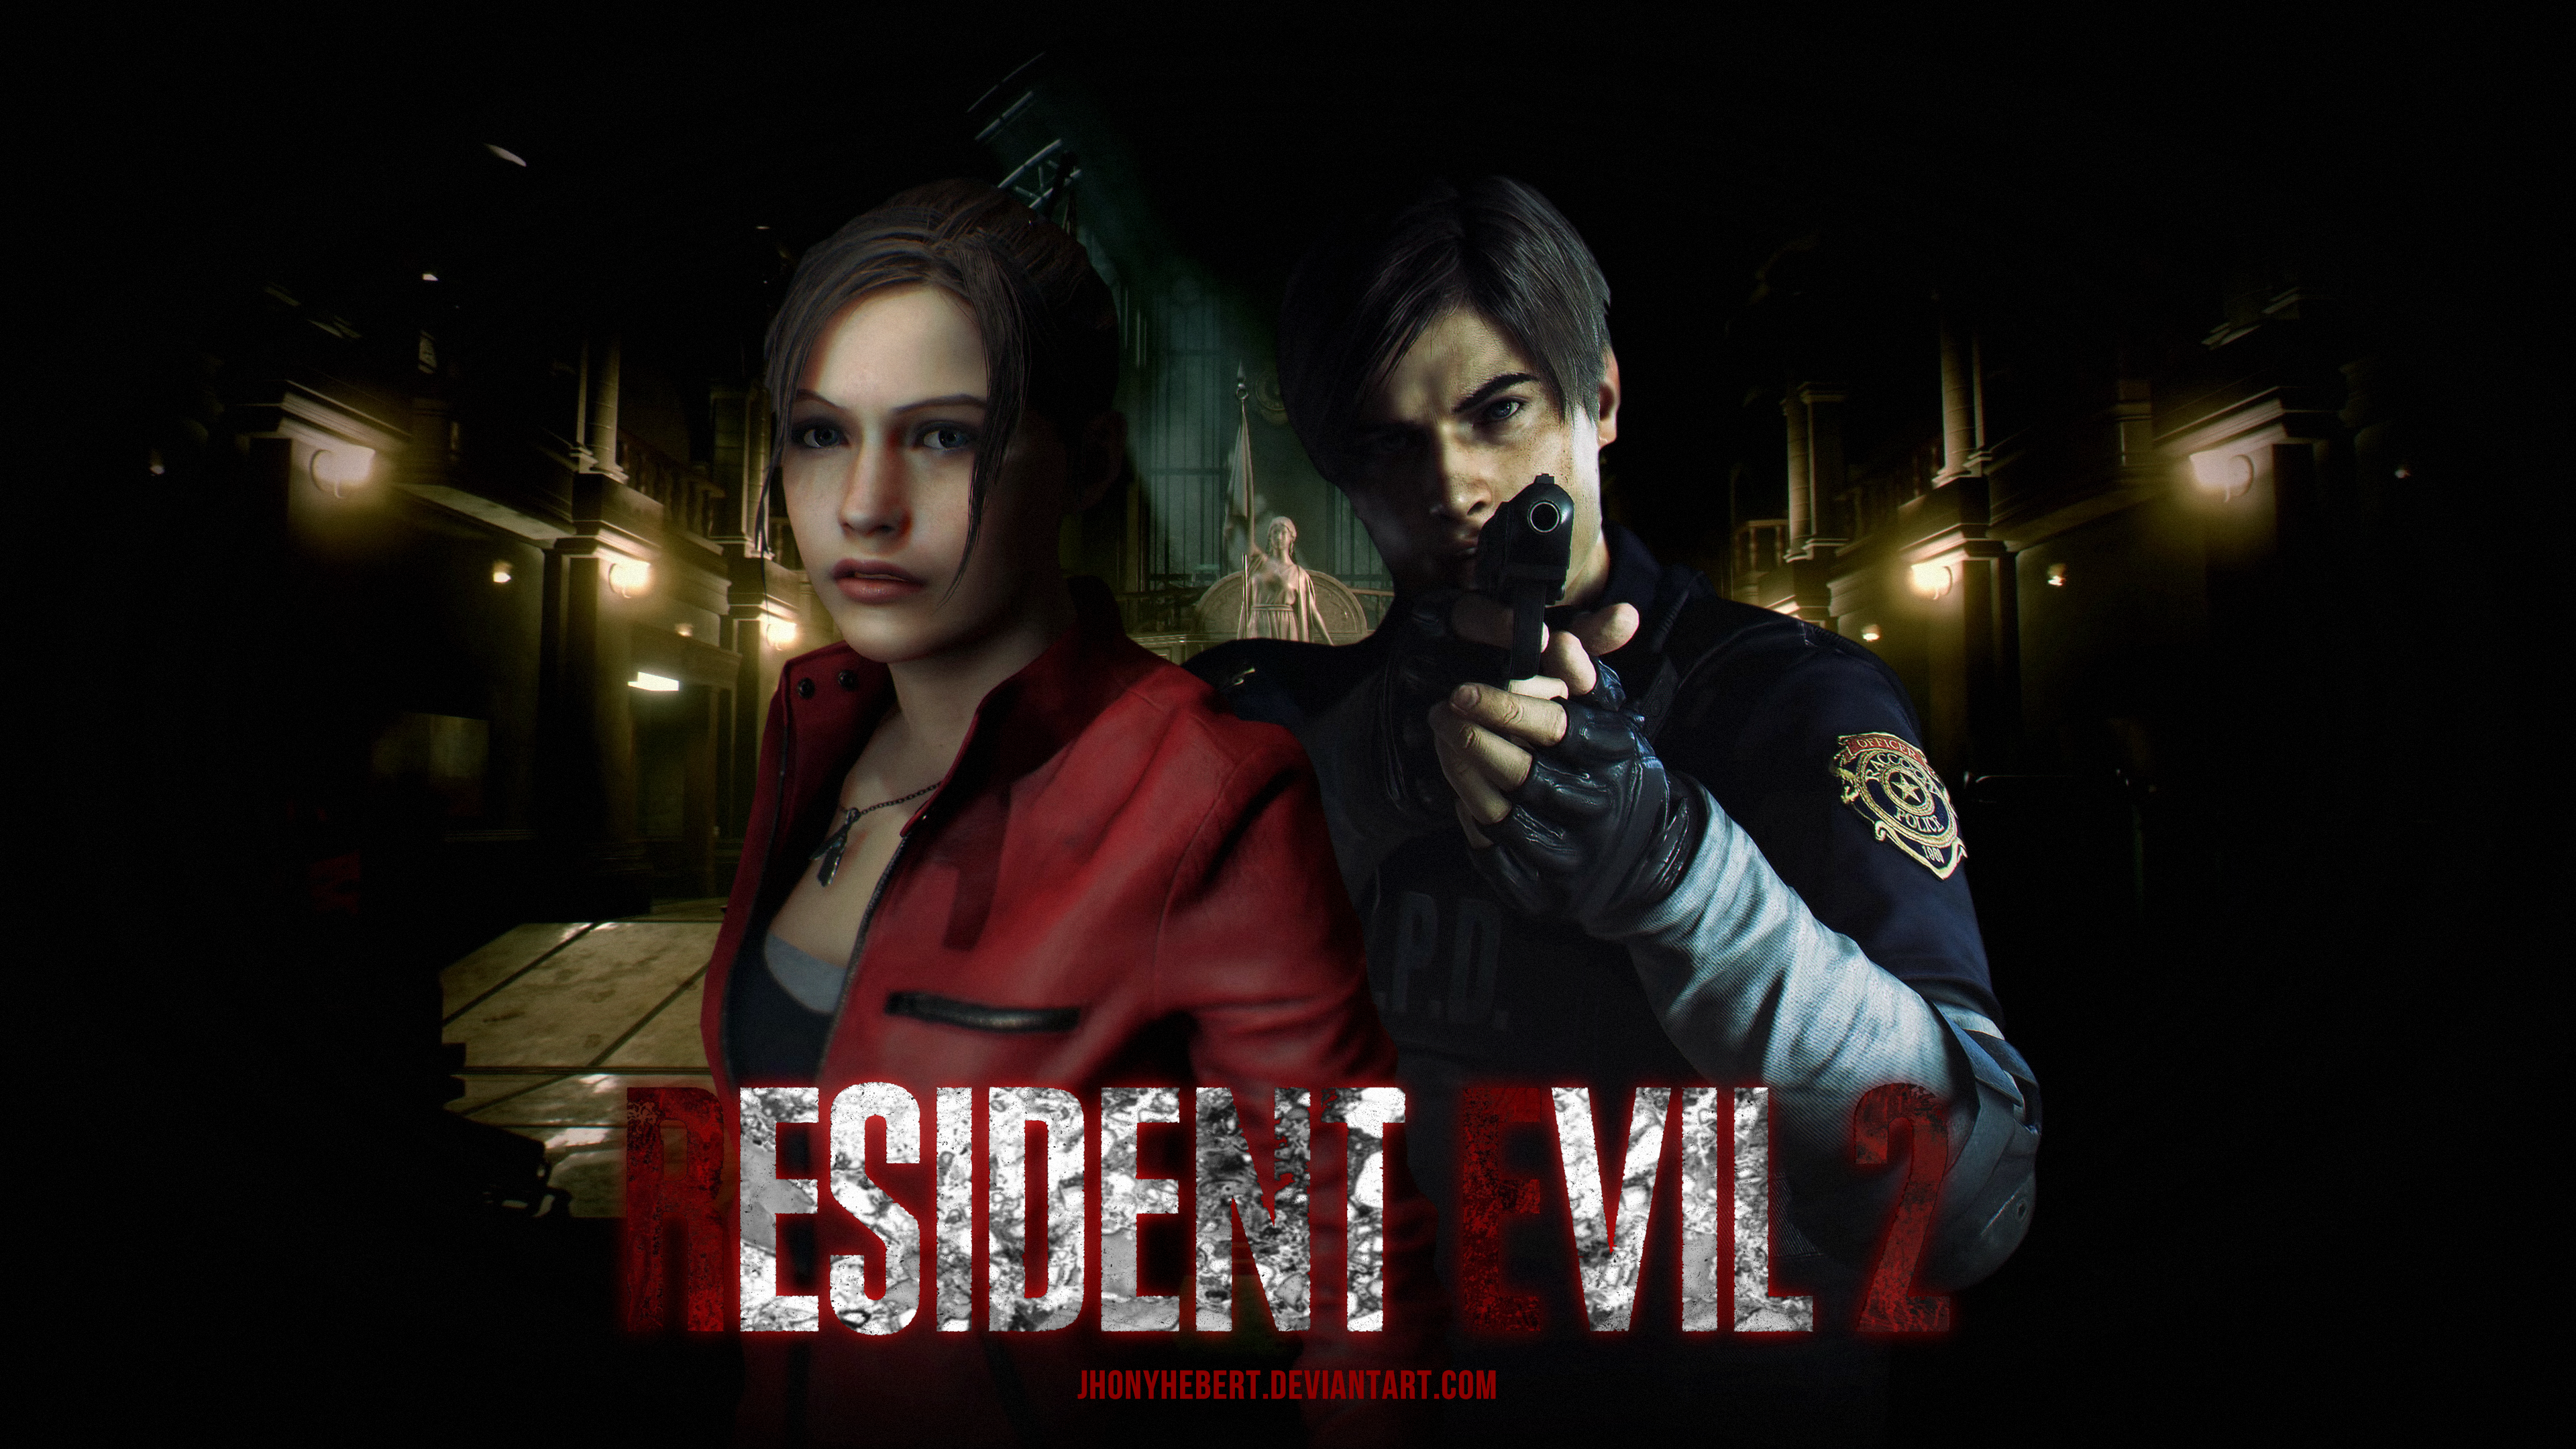 Resident Evil 2 Remake - Claire by LordHayabusa357 on DeviantArt